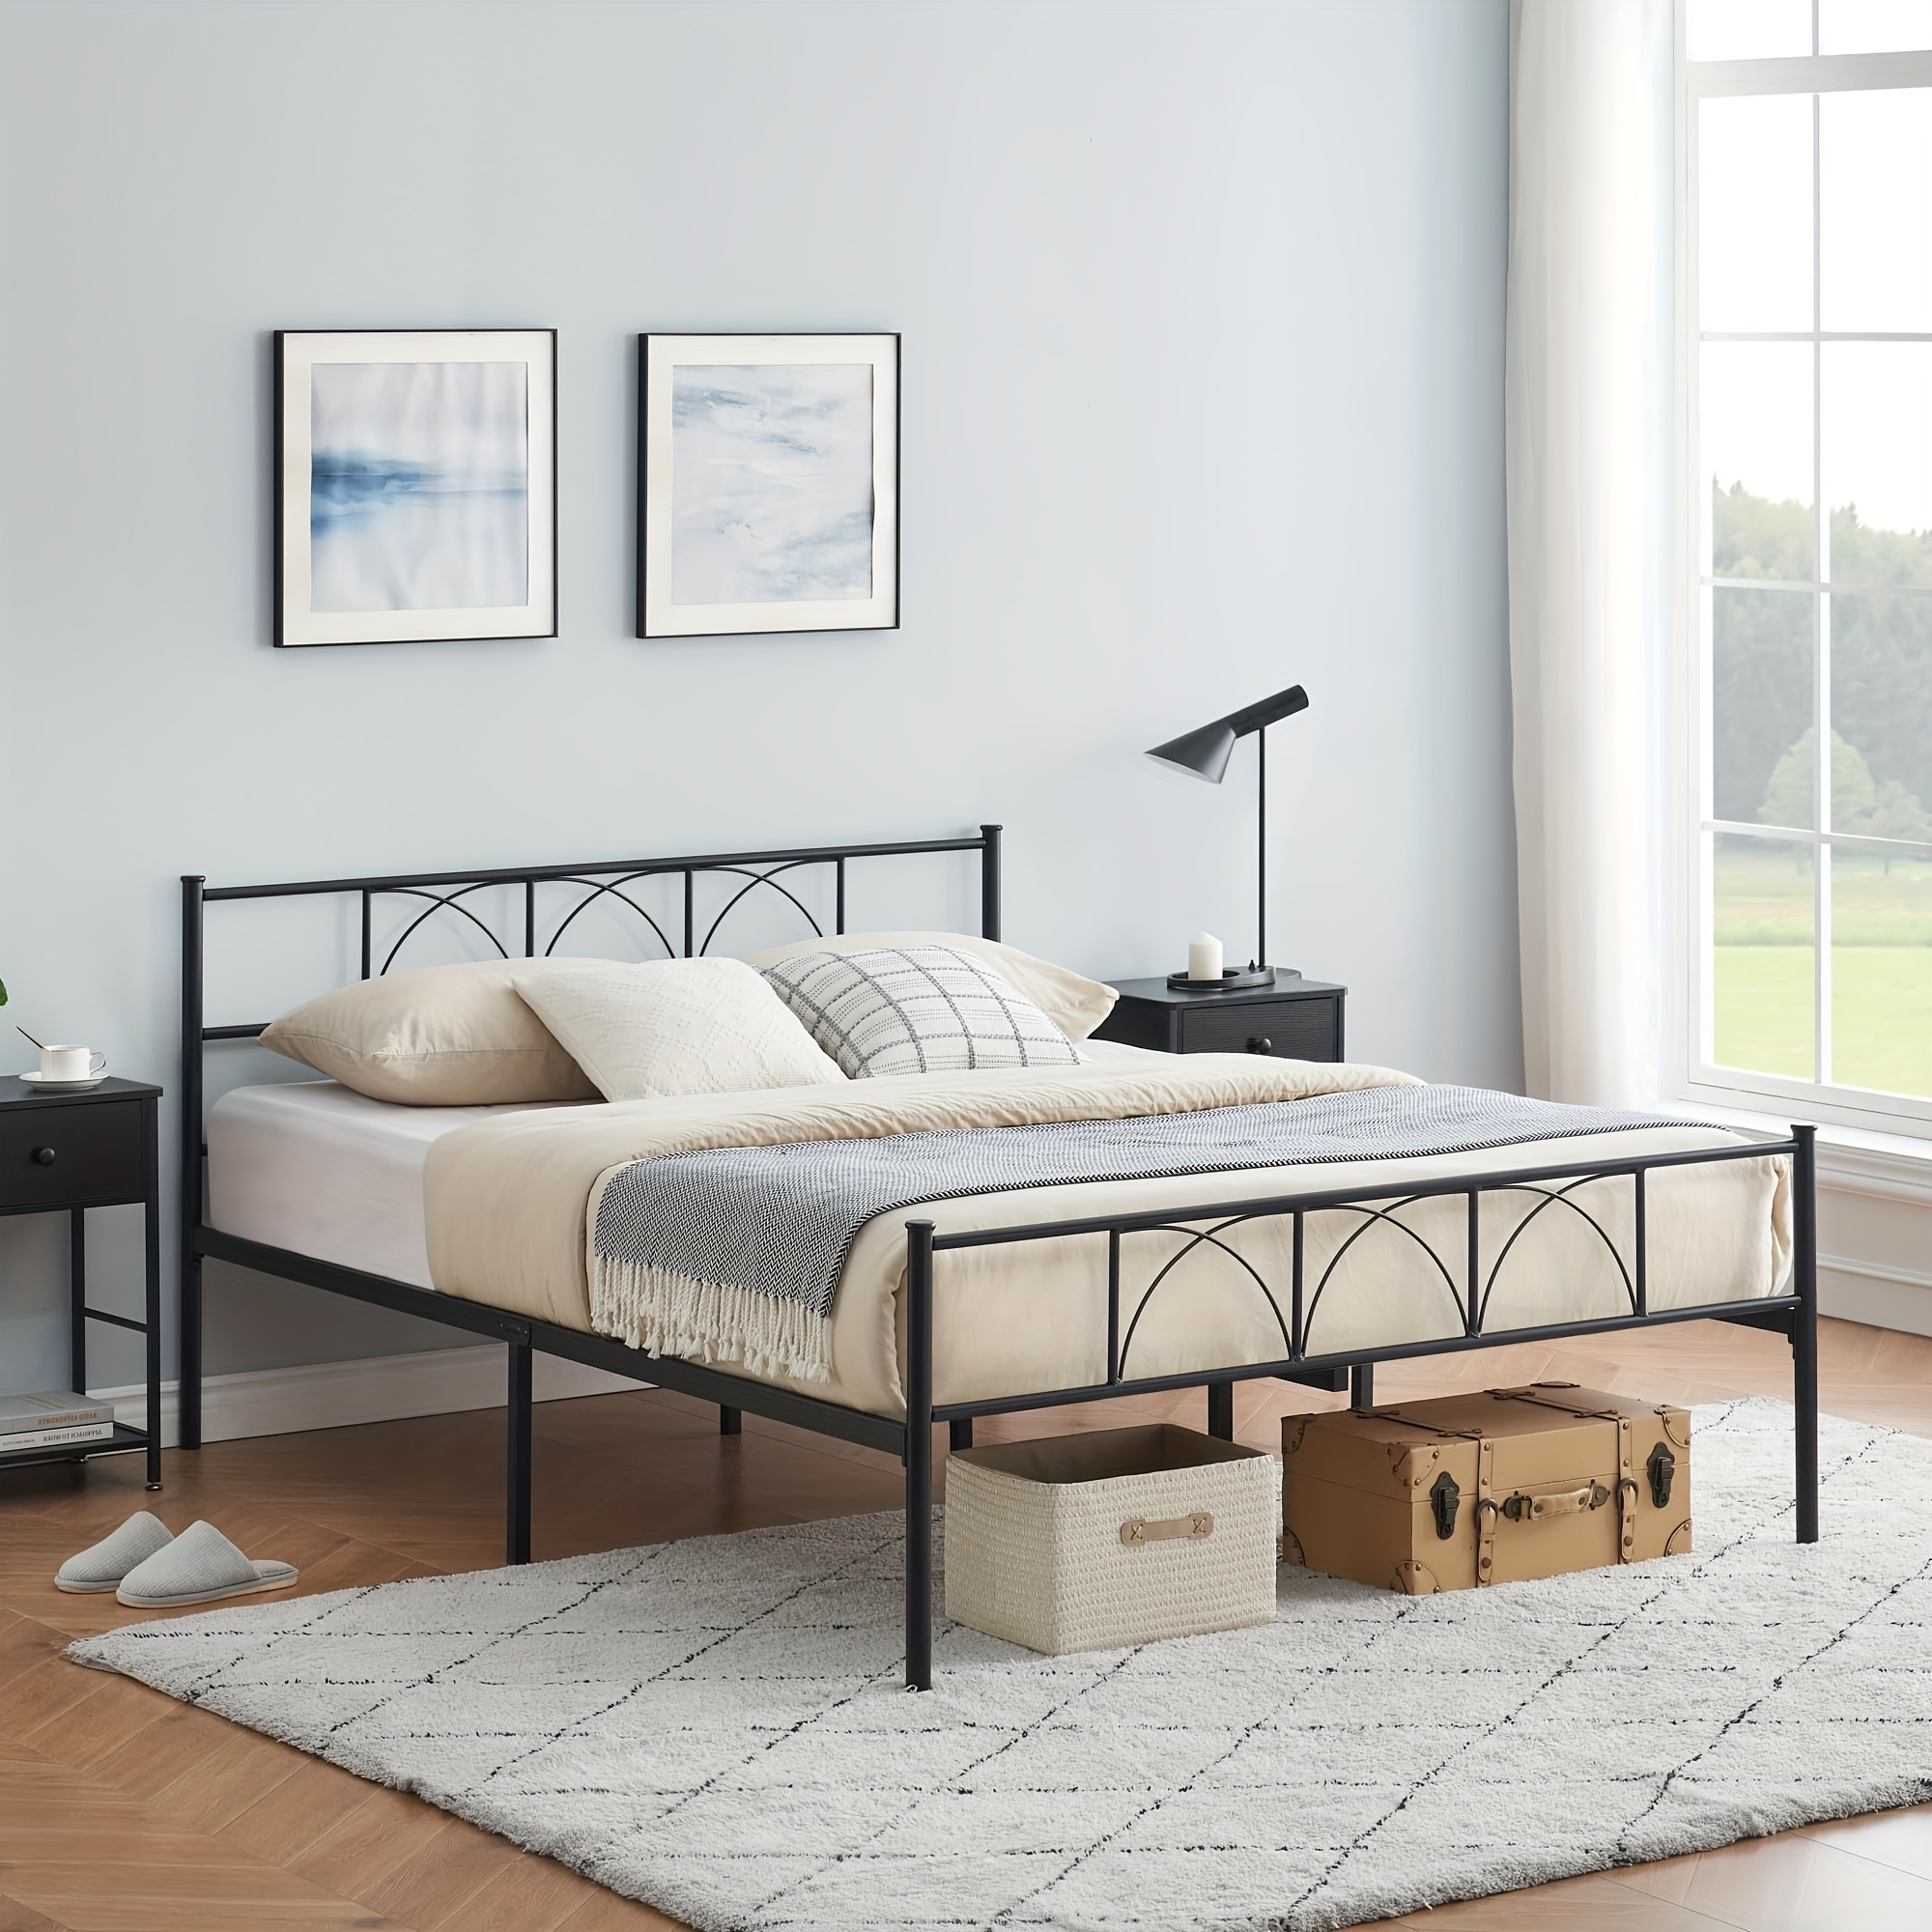 

1pc Bed Frame Metal Platform With Headboard And Footboard, Mattress Foundation, 12.2" Under Bed Storage, Max Load 800 Pounds Easy To Assemble, Black (queen/king Size)